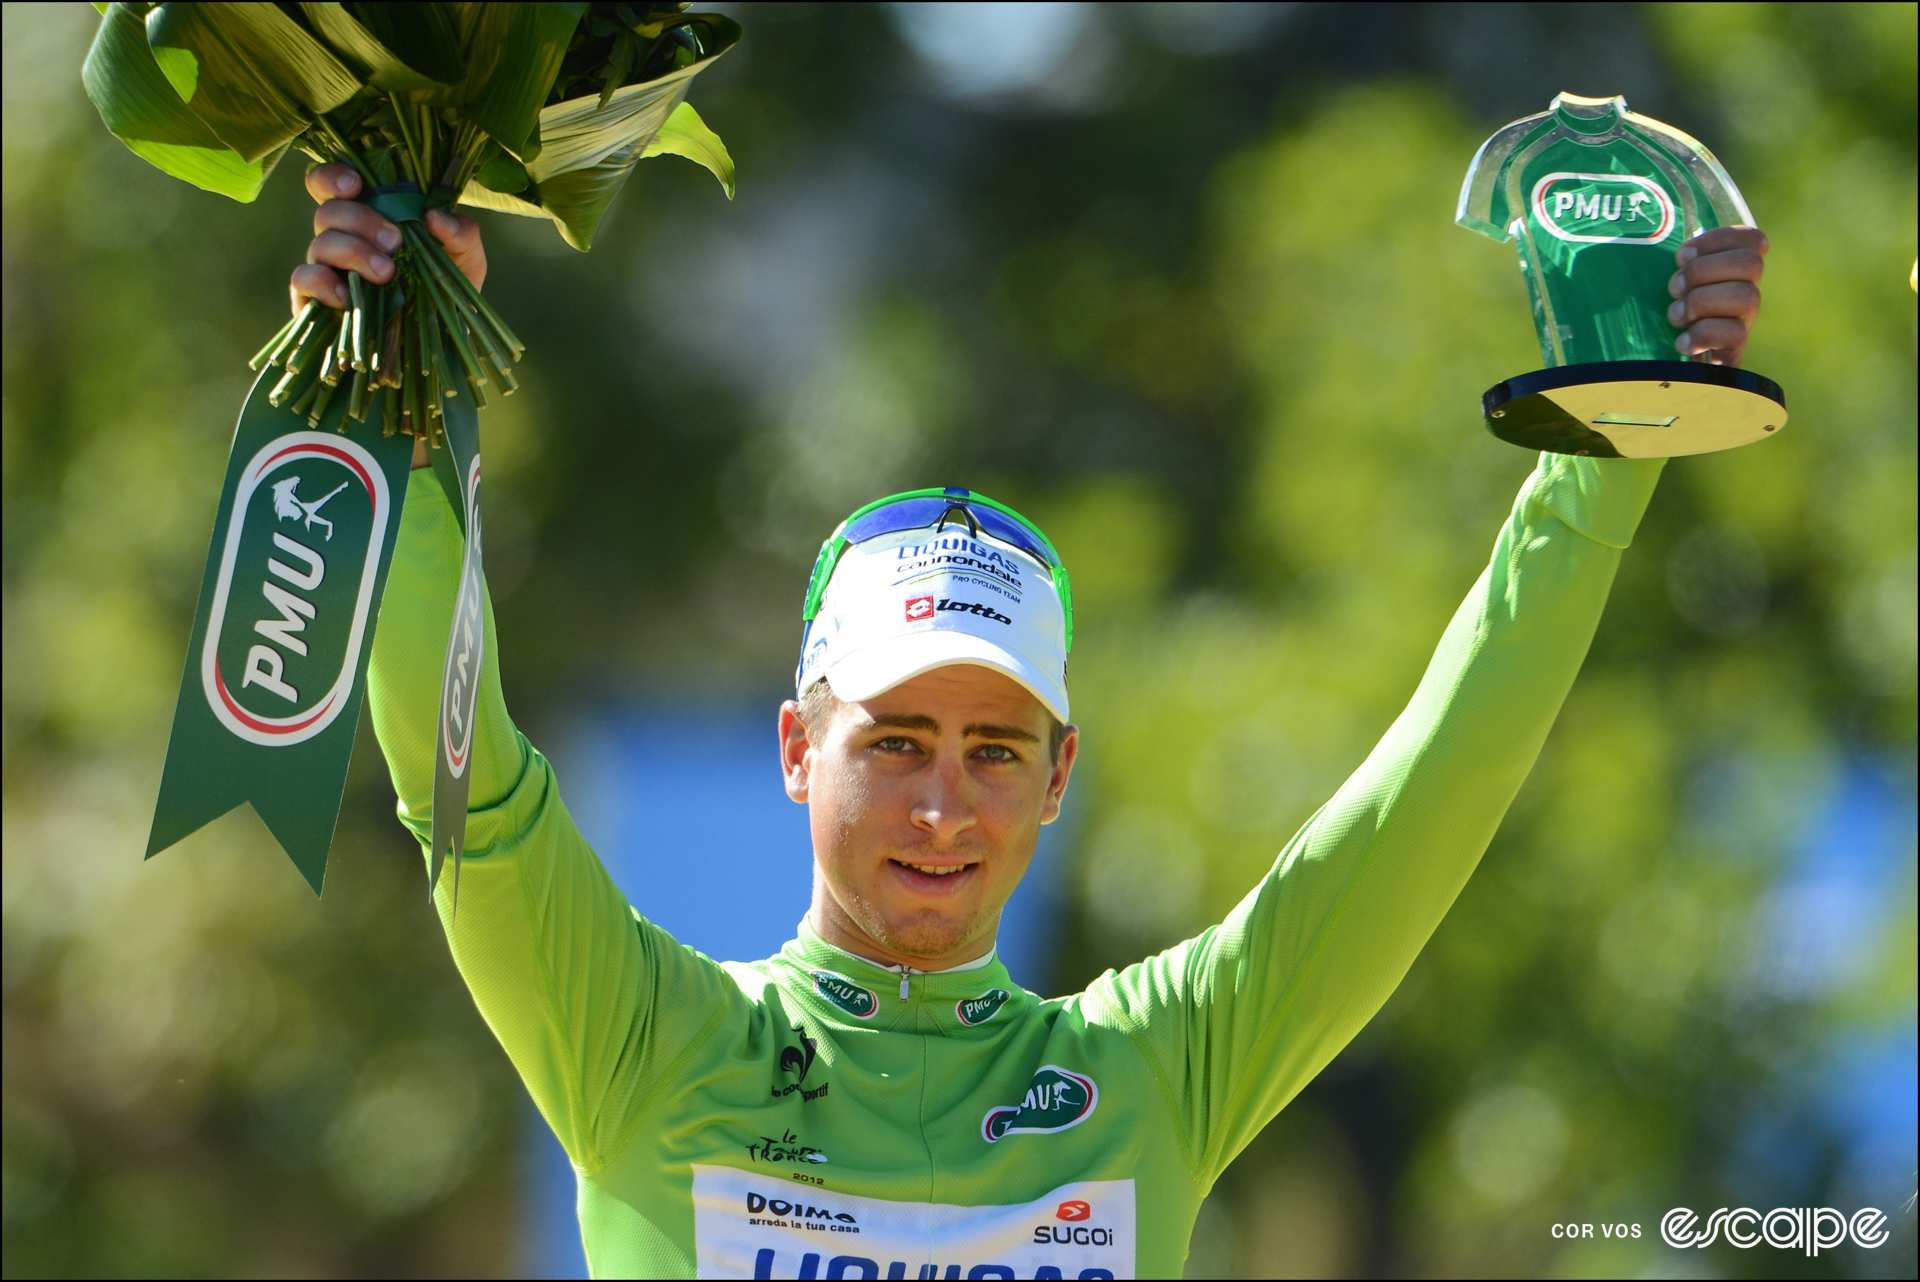 Peter Sagan on the final podium at the Tour de France in 2012, holding a bouquet of flowers, a small trophy, and wearing the green jersey.